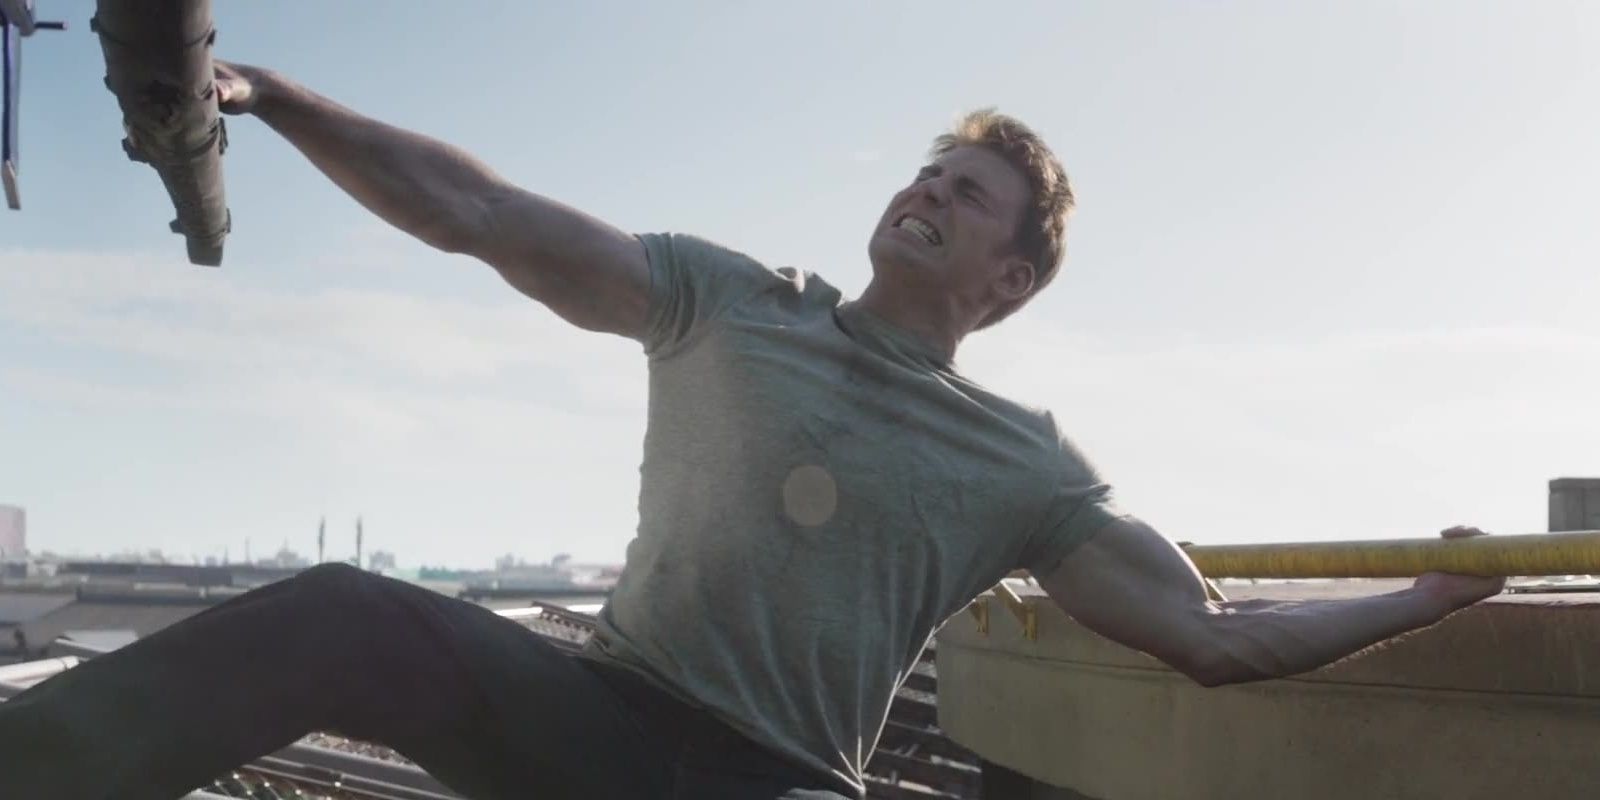 Steve Rogers stops Bucky's helicopter from taking off in Captain America: Civil War.